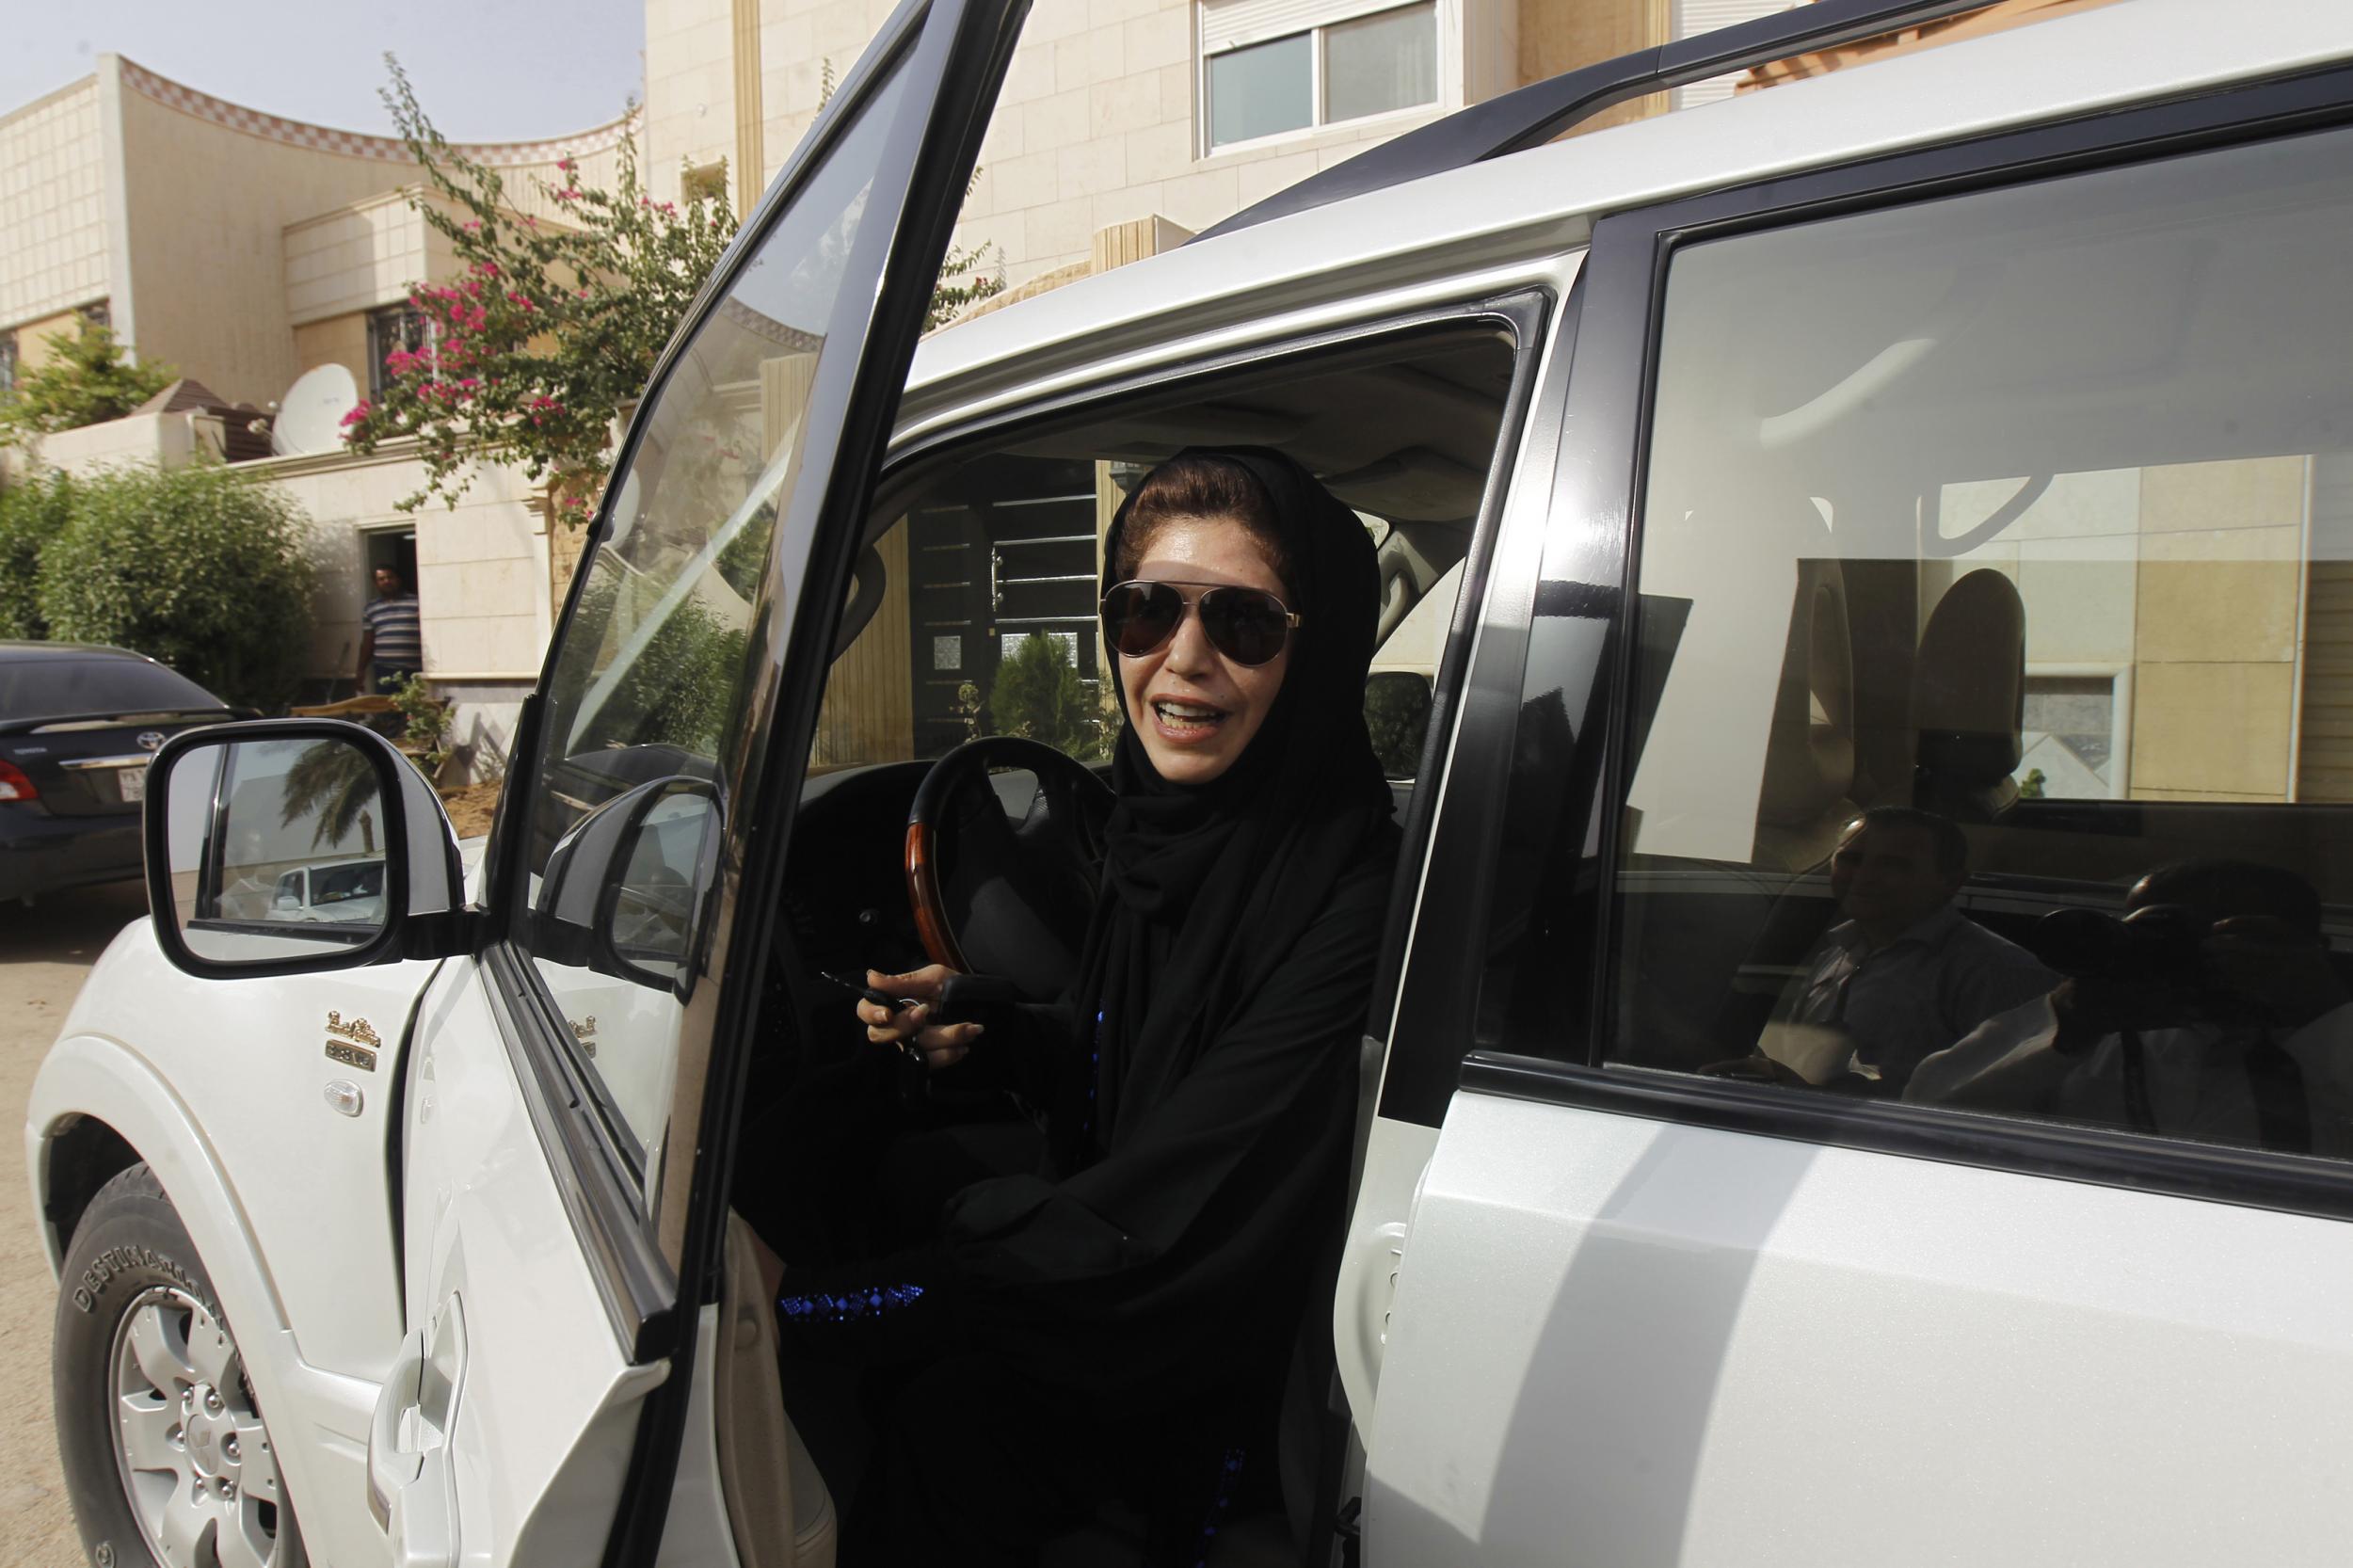 Azza Al Shmasani alights from her car after driving in defiance of the ban on driving licenses for women in Riyadh on 22 June 2011